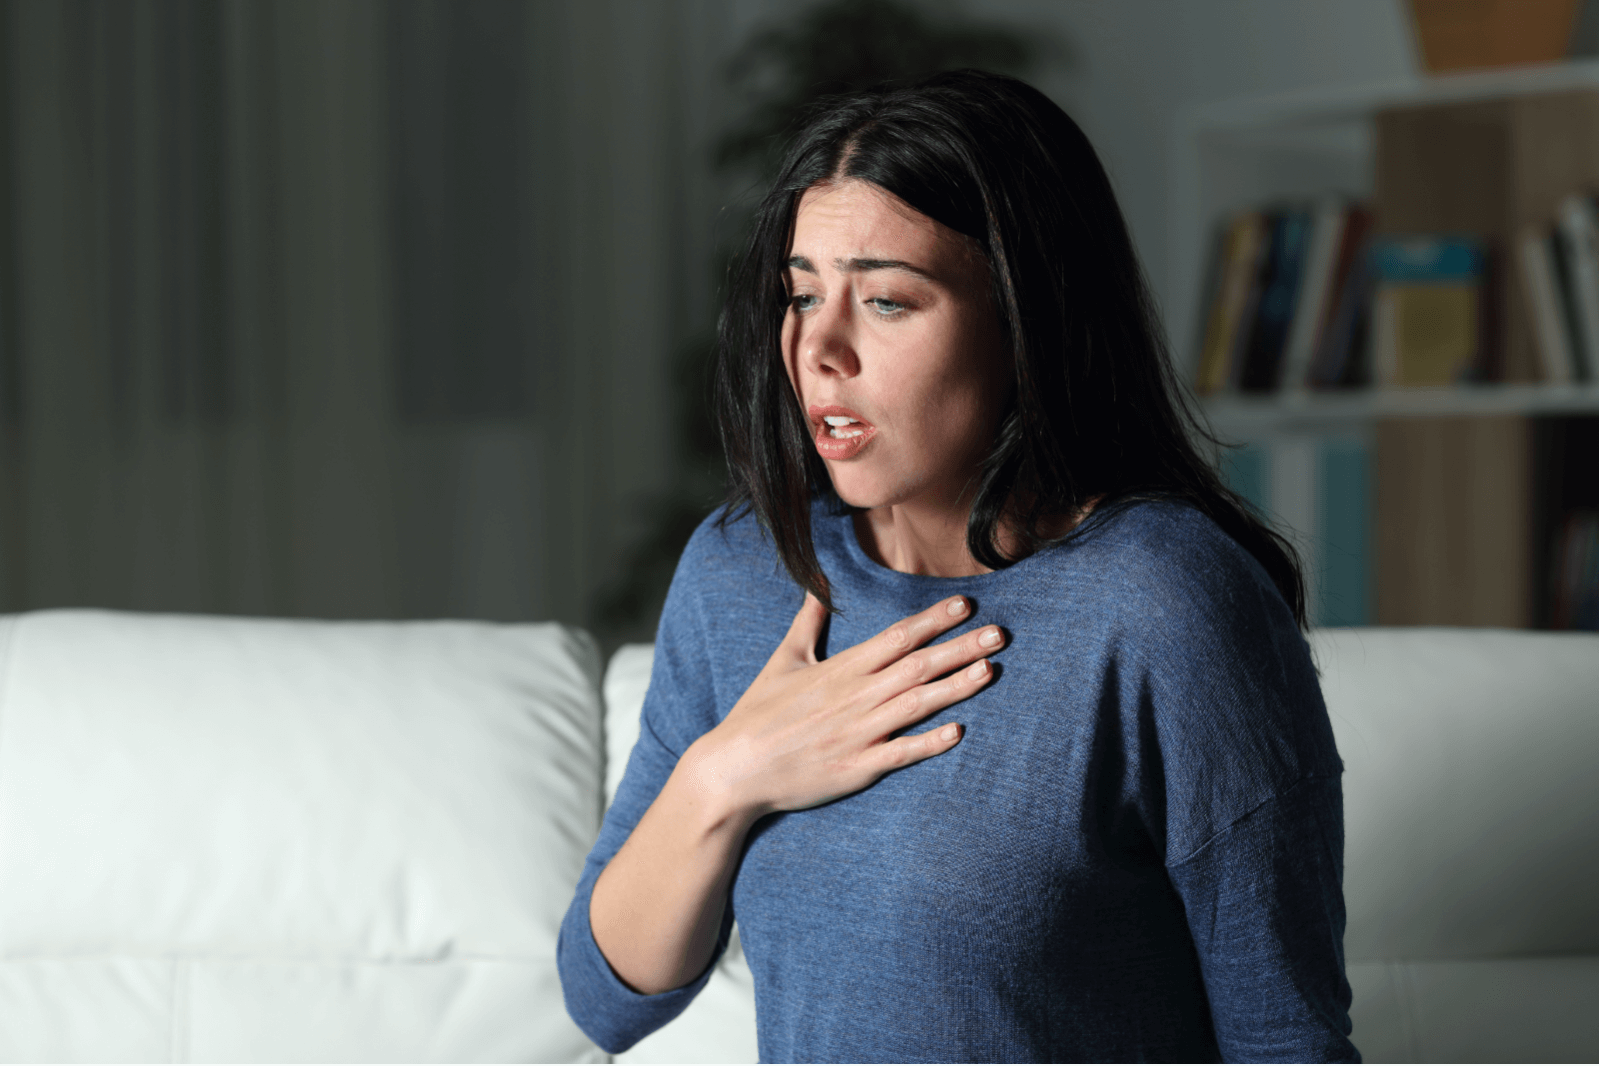 Anxiety, Palpitations and More Anxiety